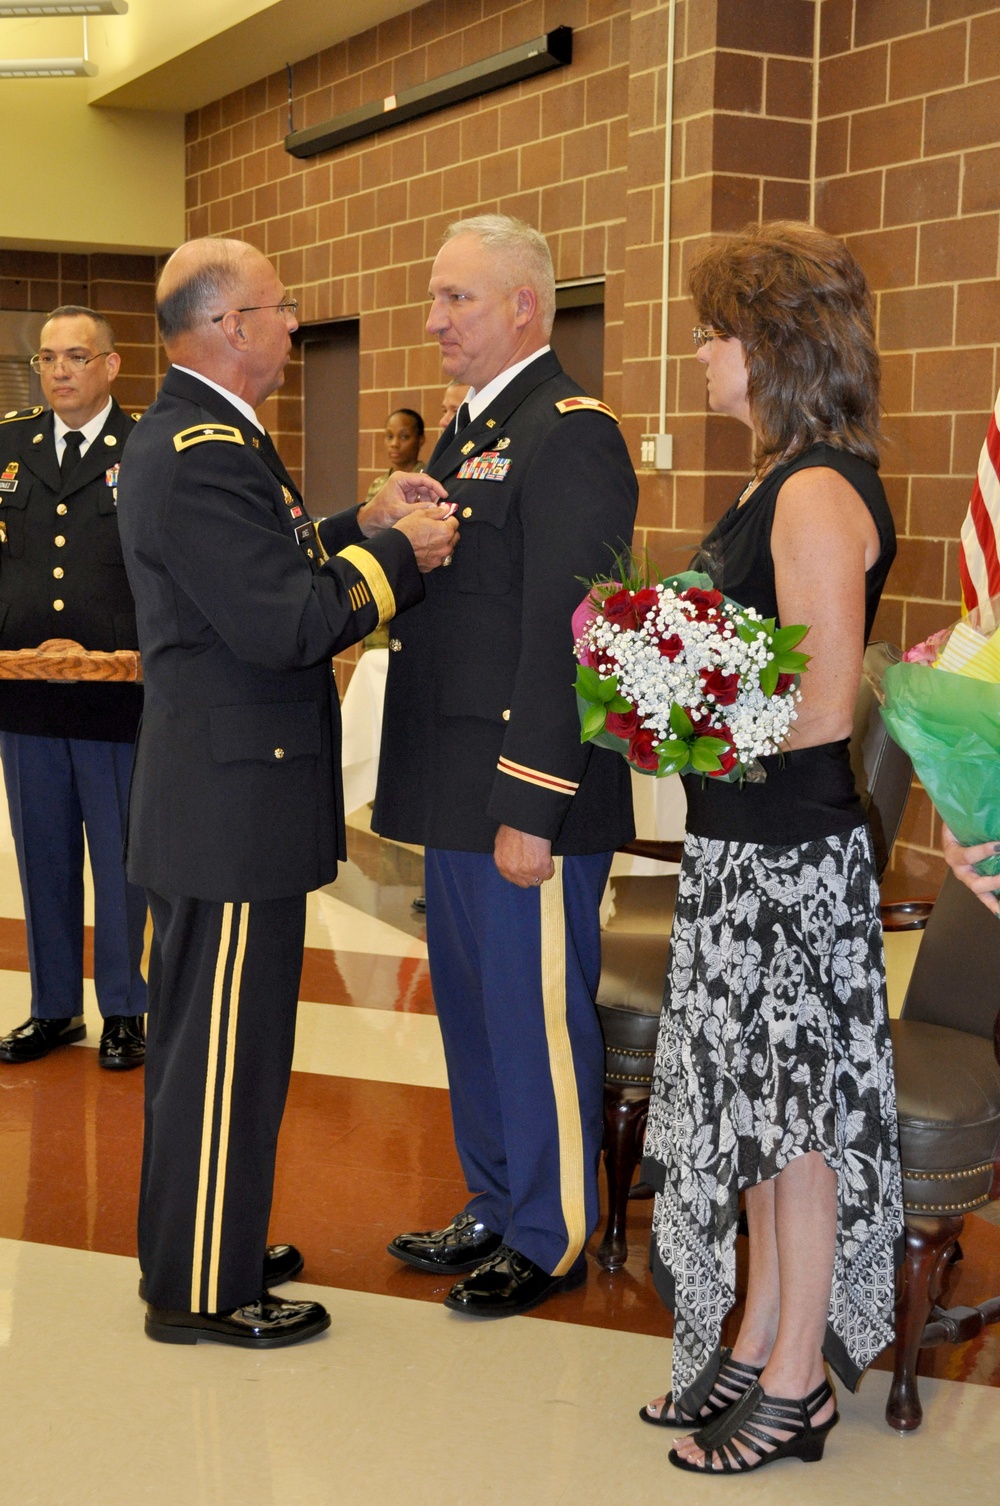 Reserve Soldier honored during retirement ceremony